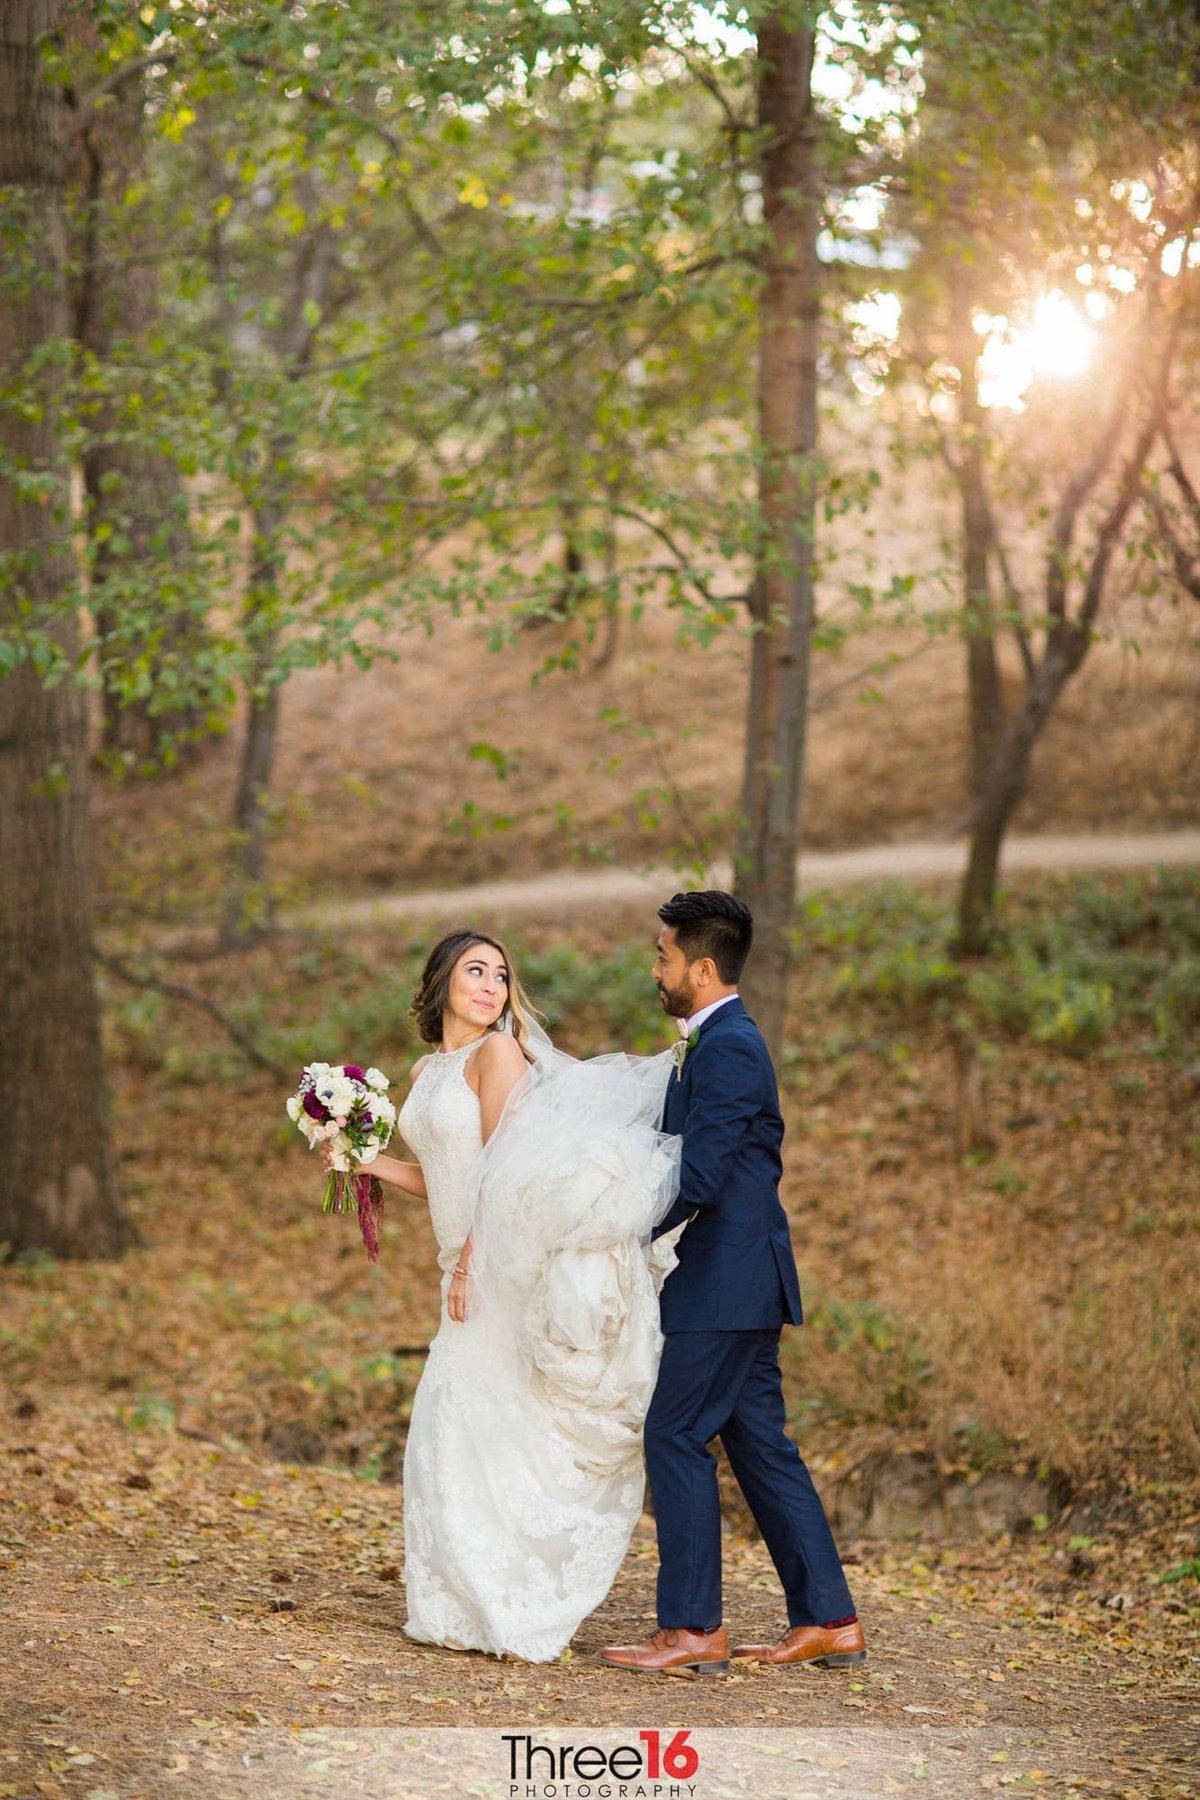 Bride looks back at her Groom as he carries her wedding dress train off the dirt during their walk in the woods